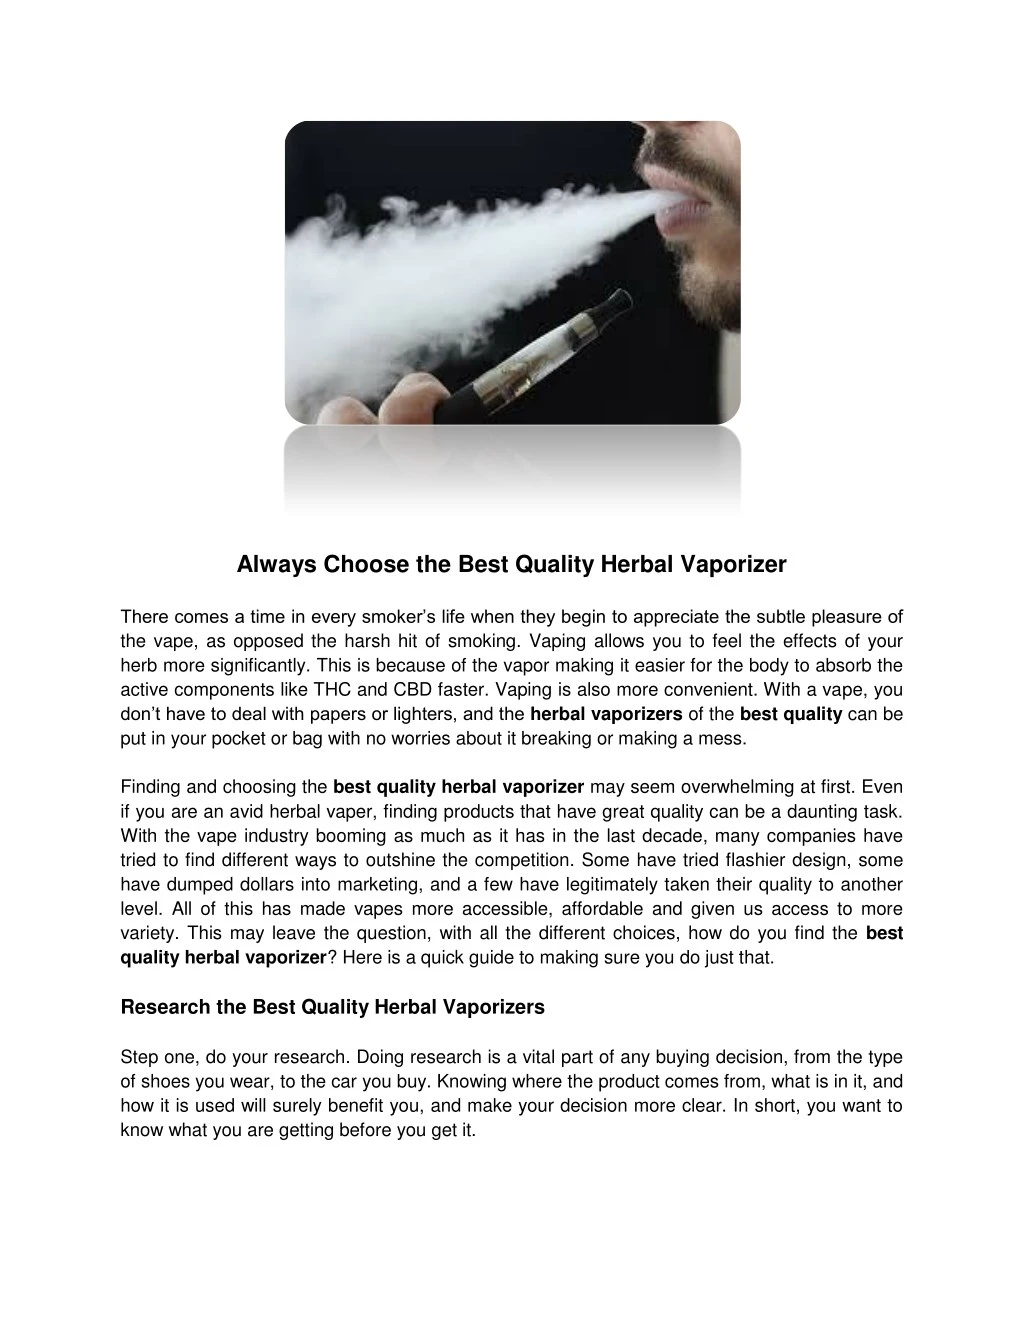 always choose the best quality herbal vaporizer